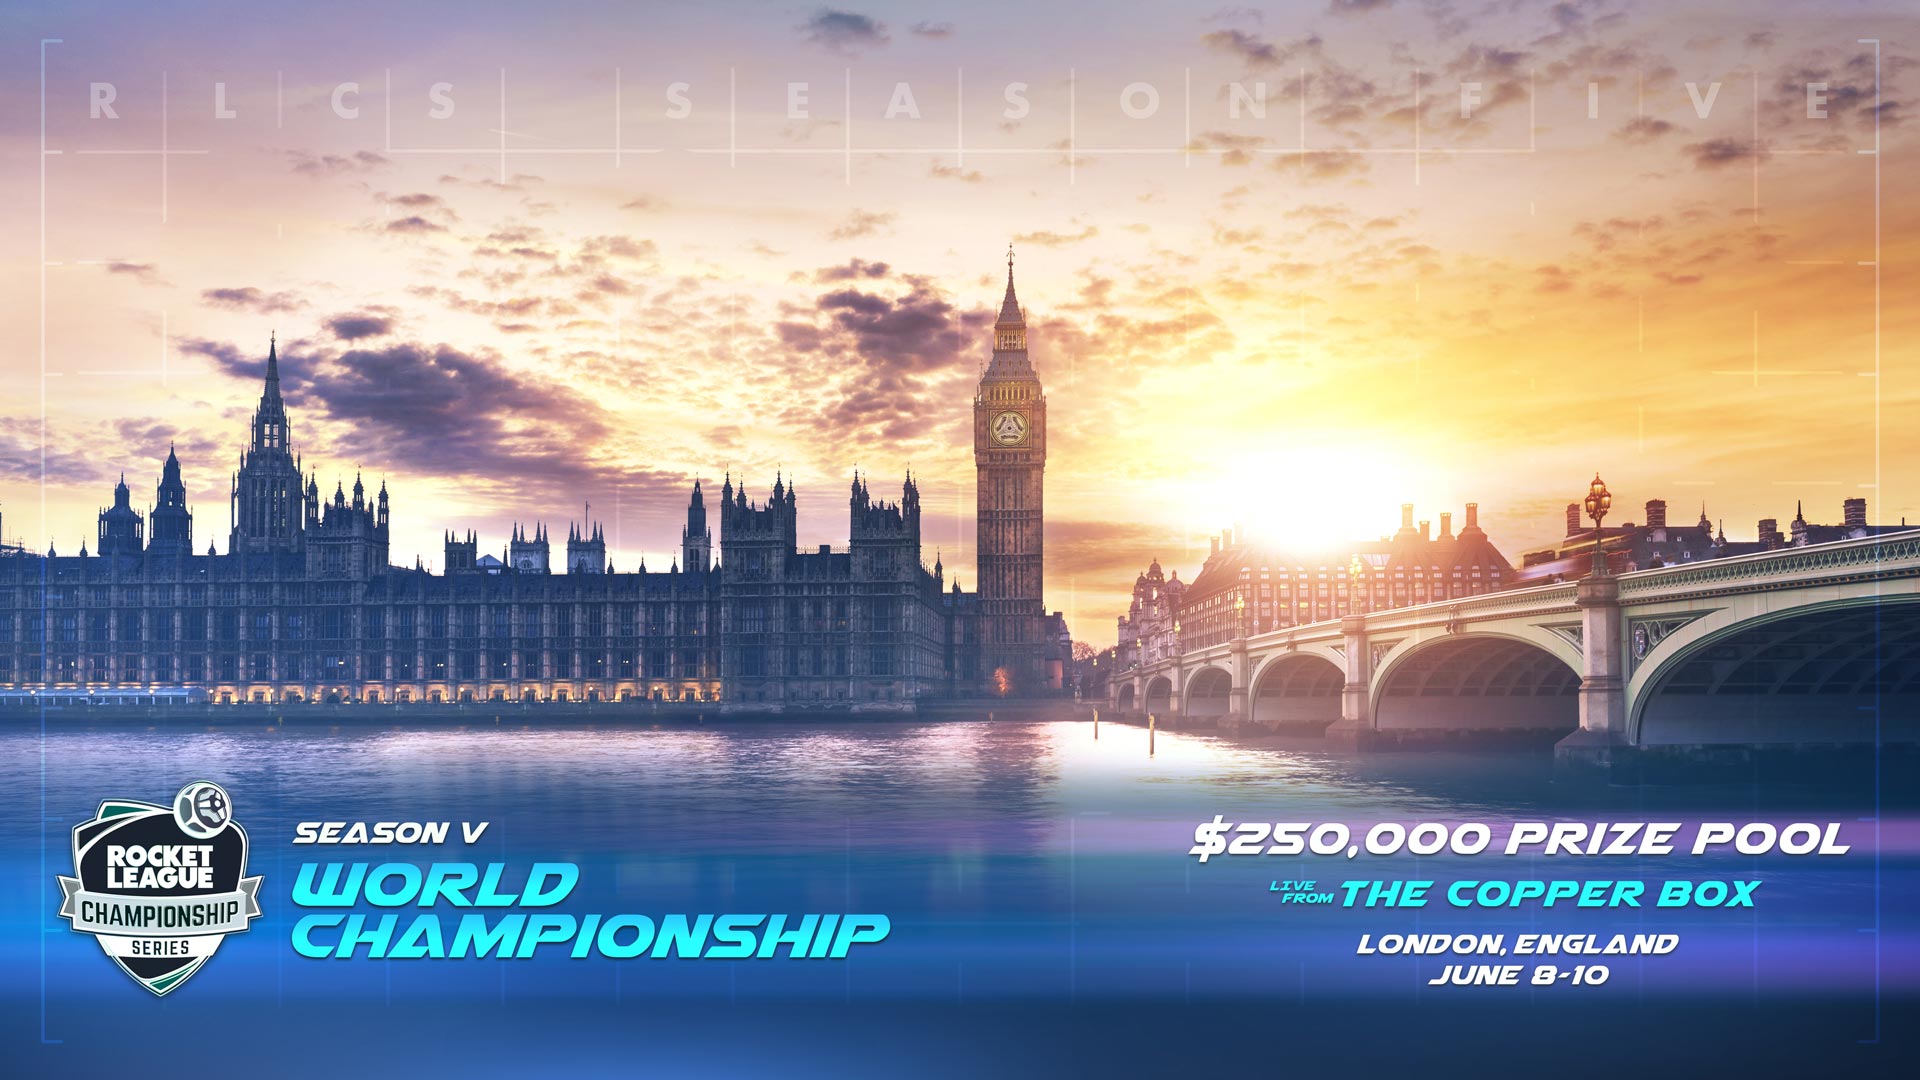 The RLCS World Championship Returns to Europe! Rocket League®